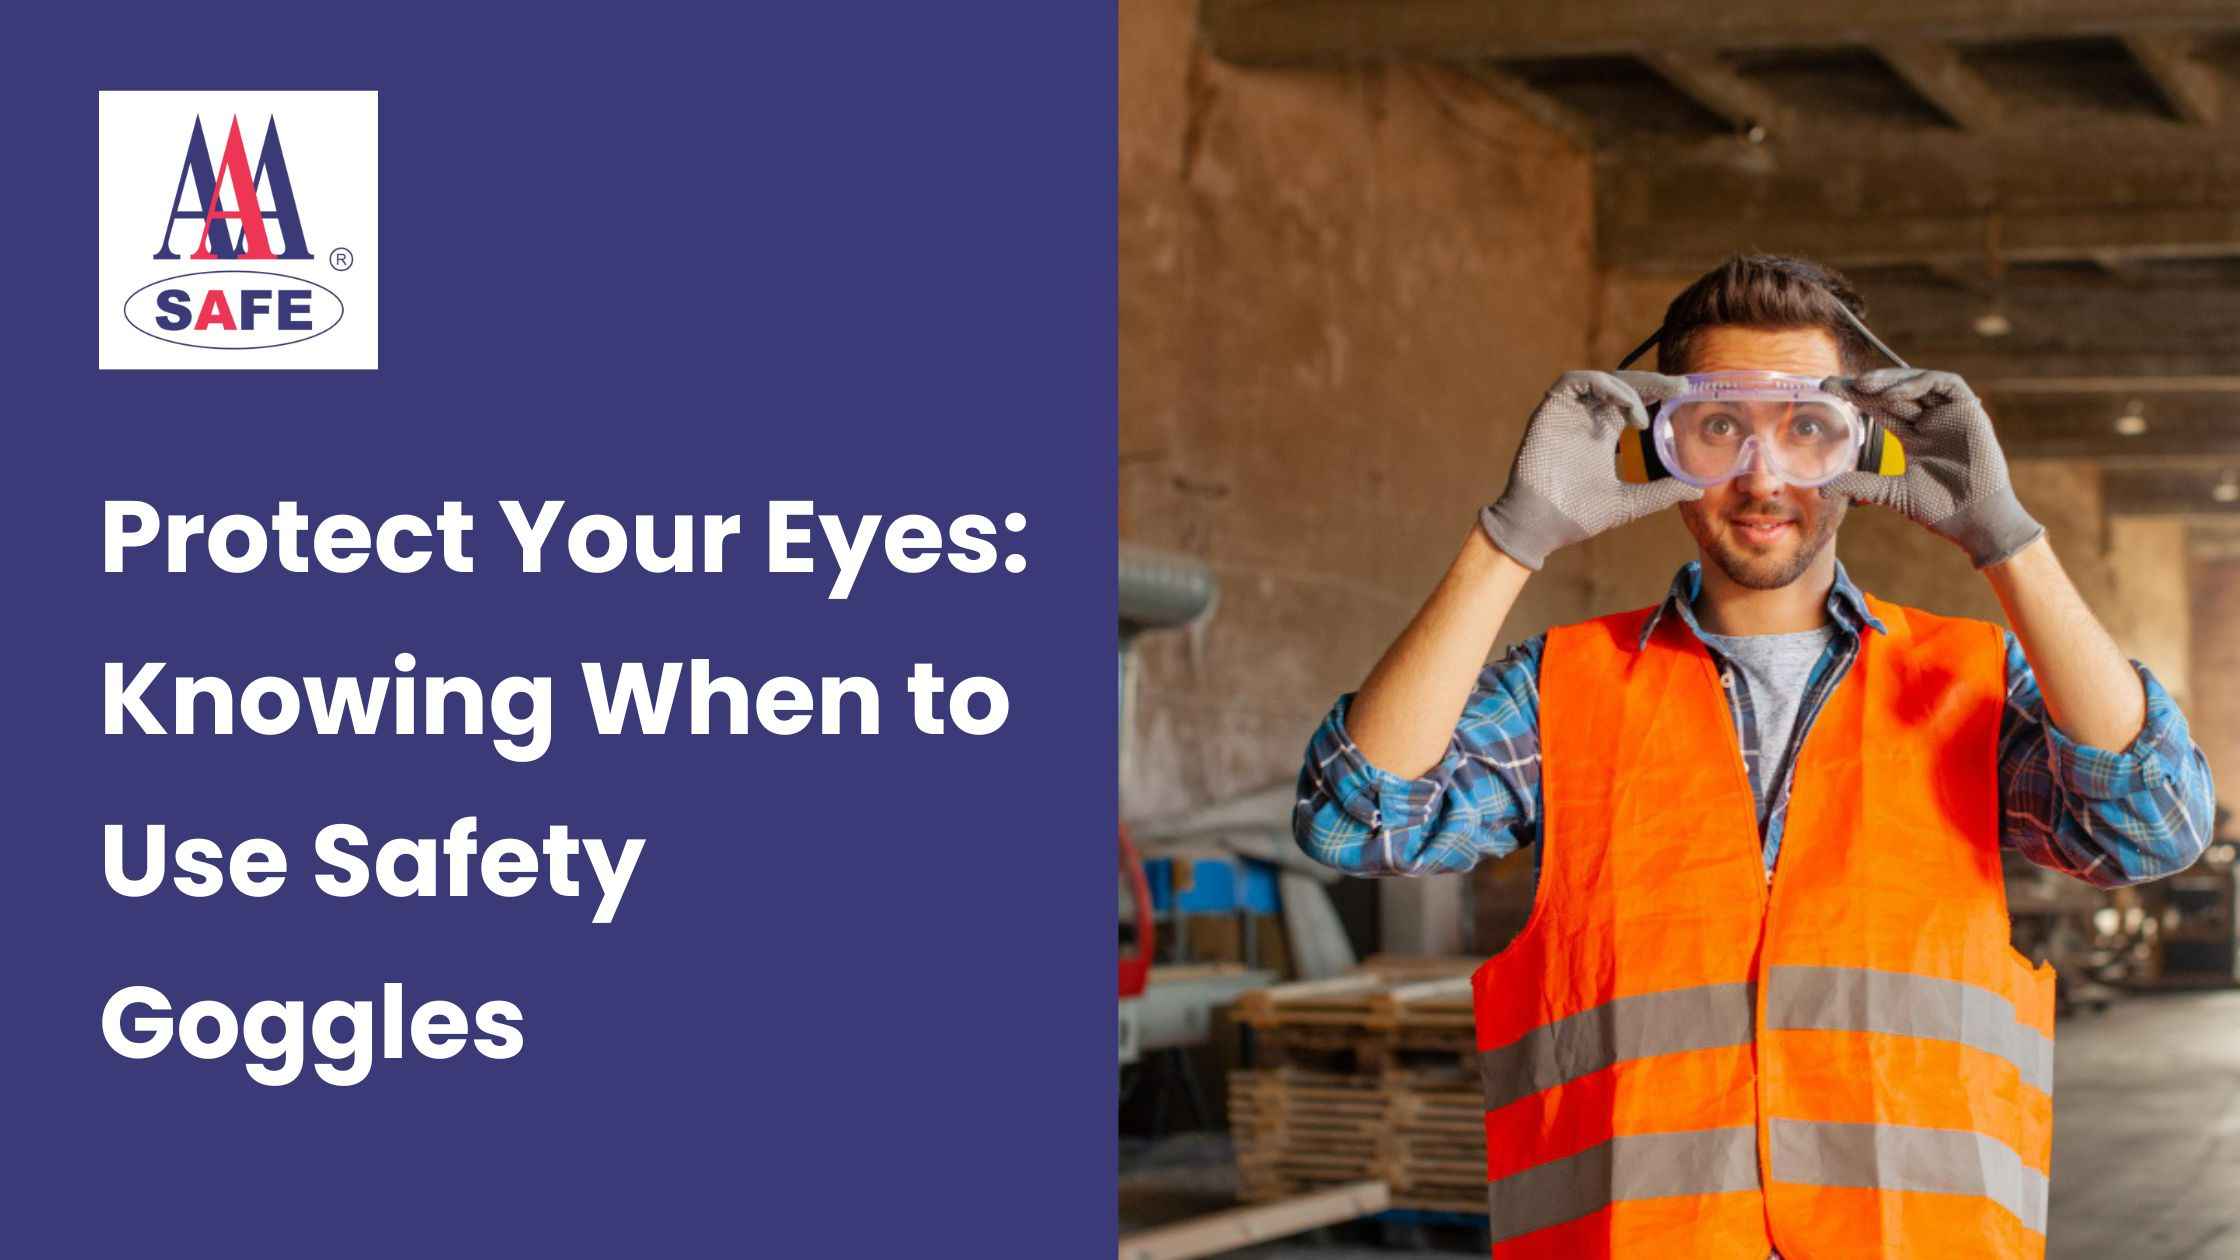 Protect Your Eyes: Knowing When to Use Safety Goggles